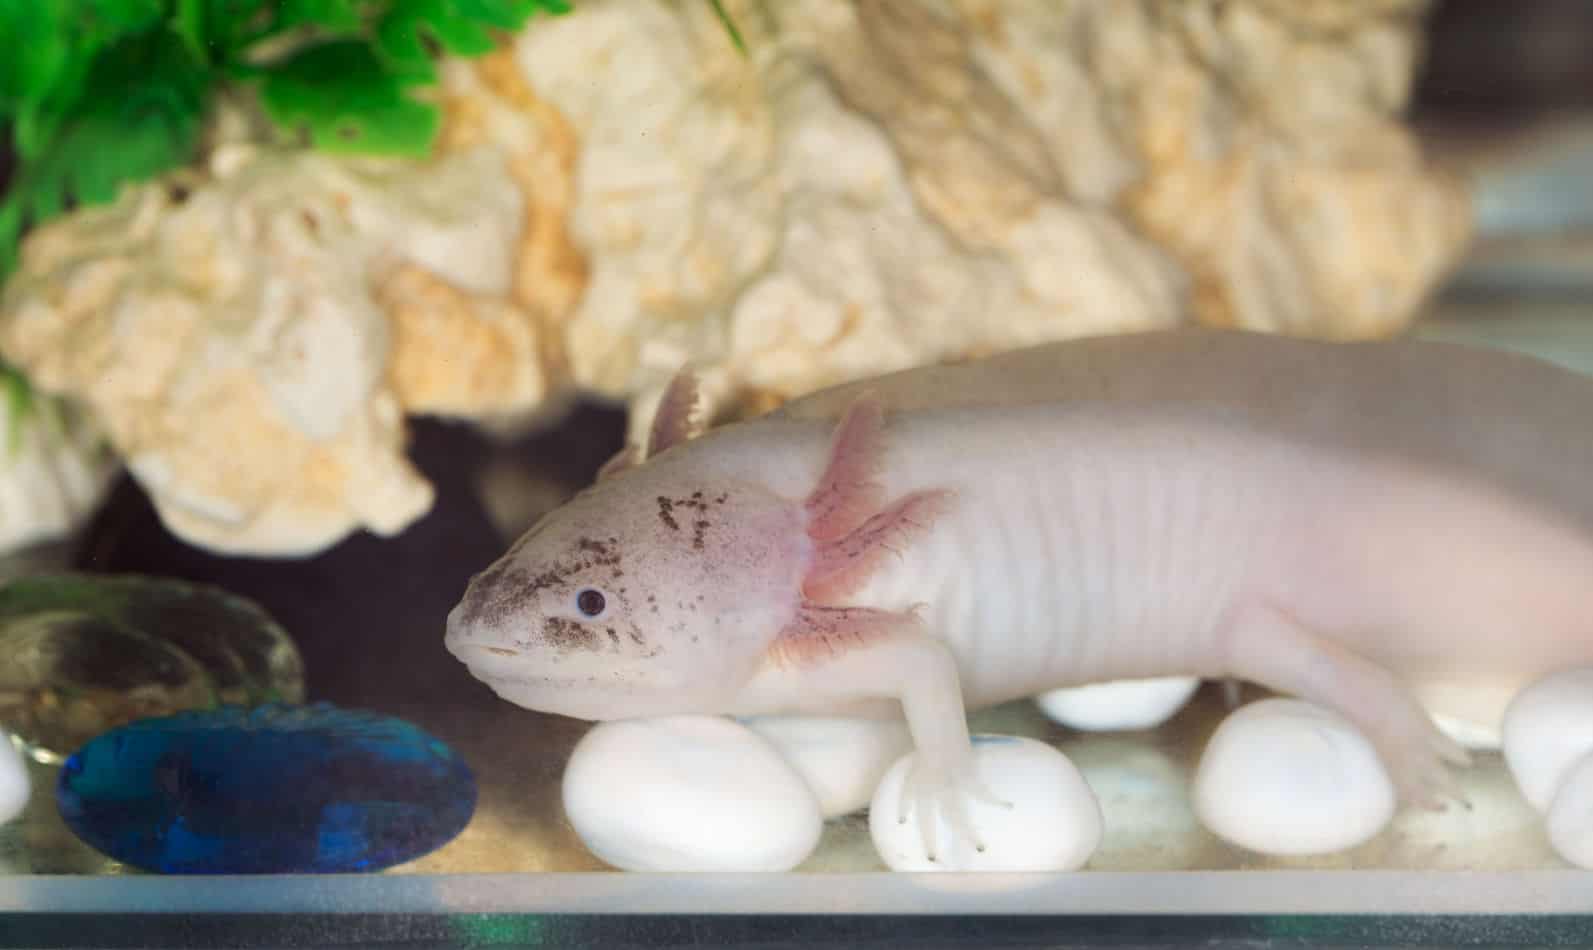 Pink Axolotl A Beginner S Guide With Pics Cost To Buy And Care Info Embora Pets